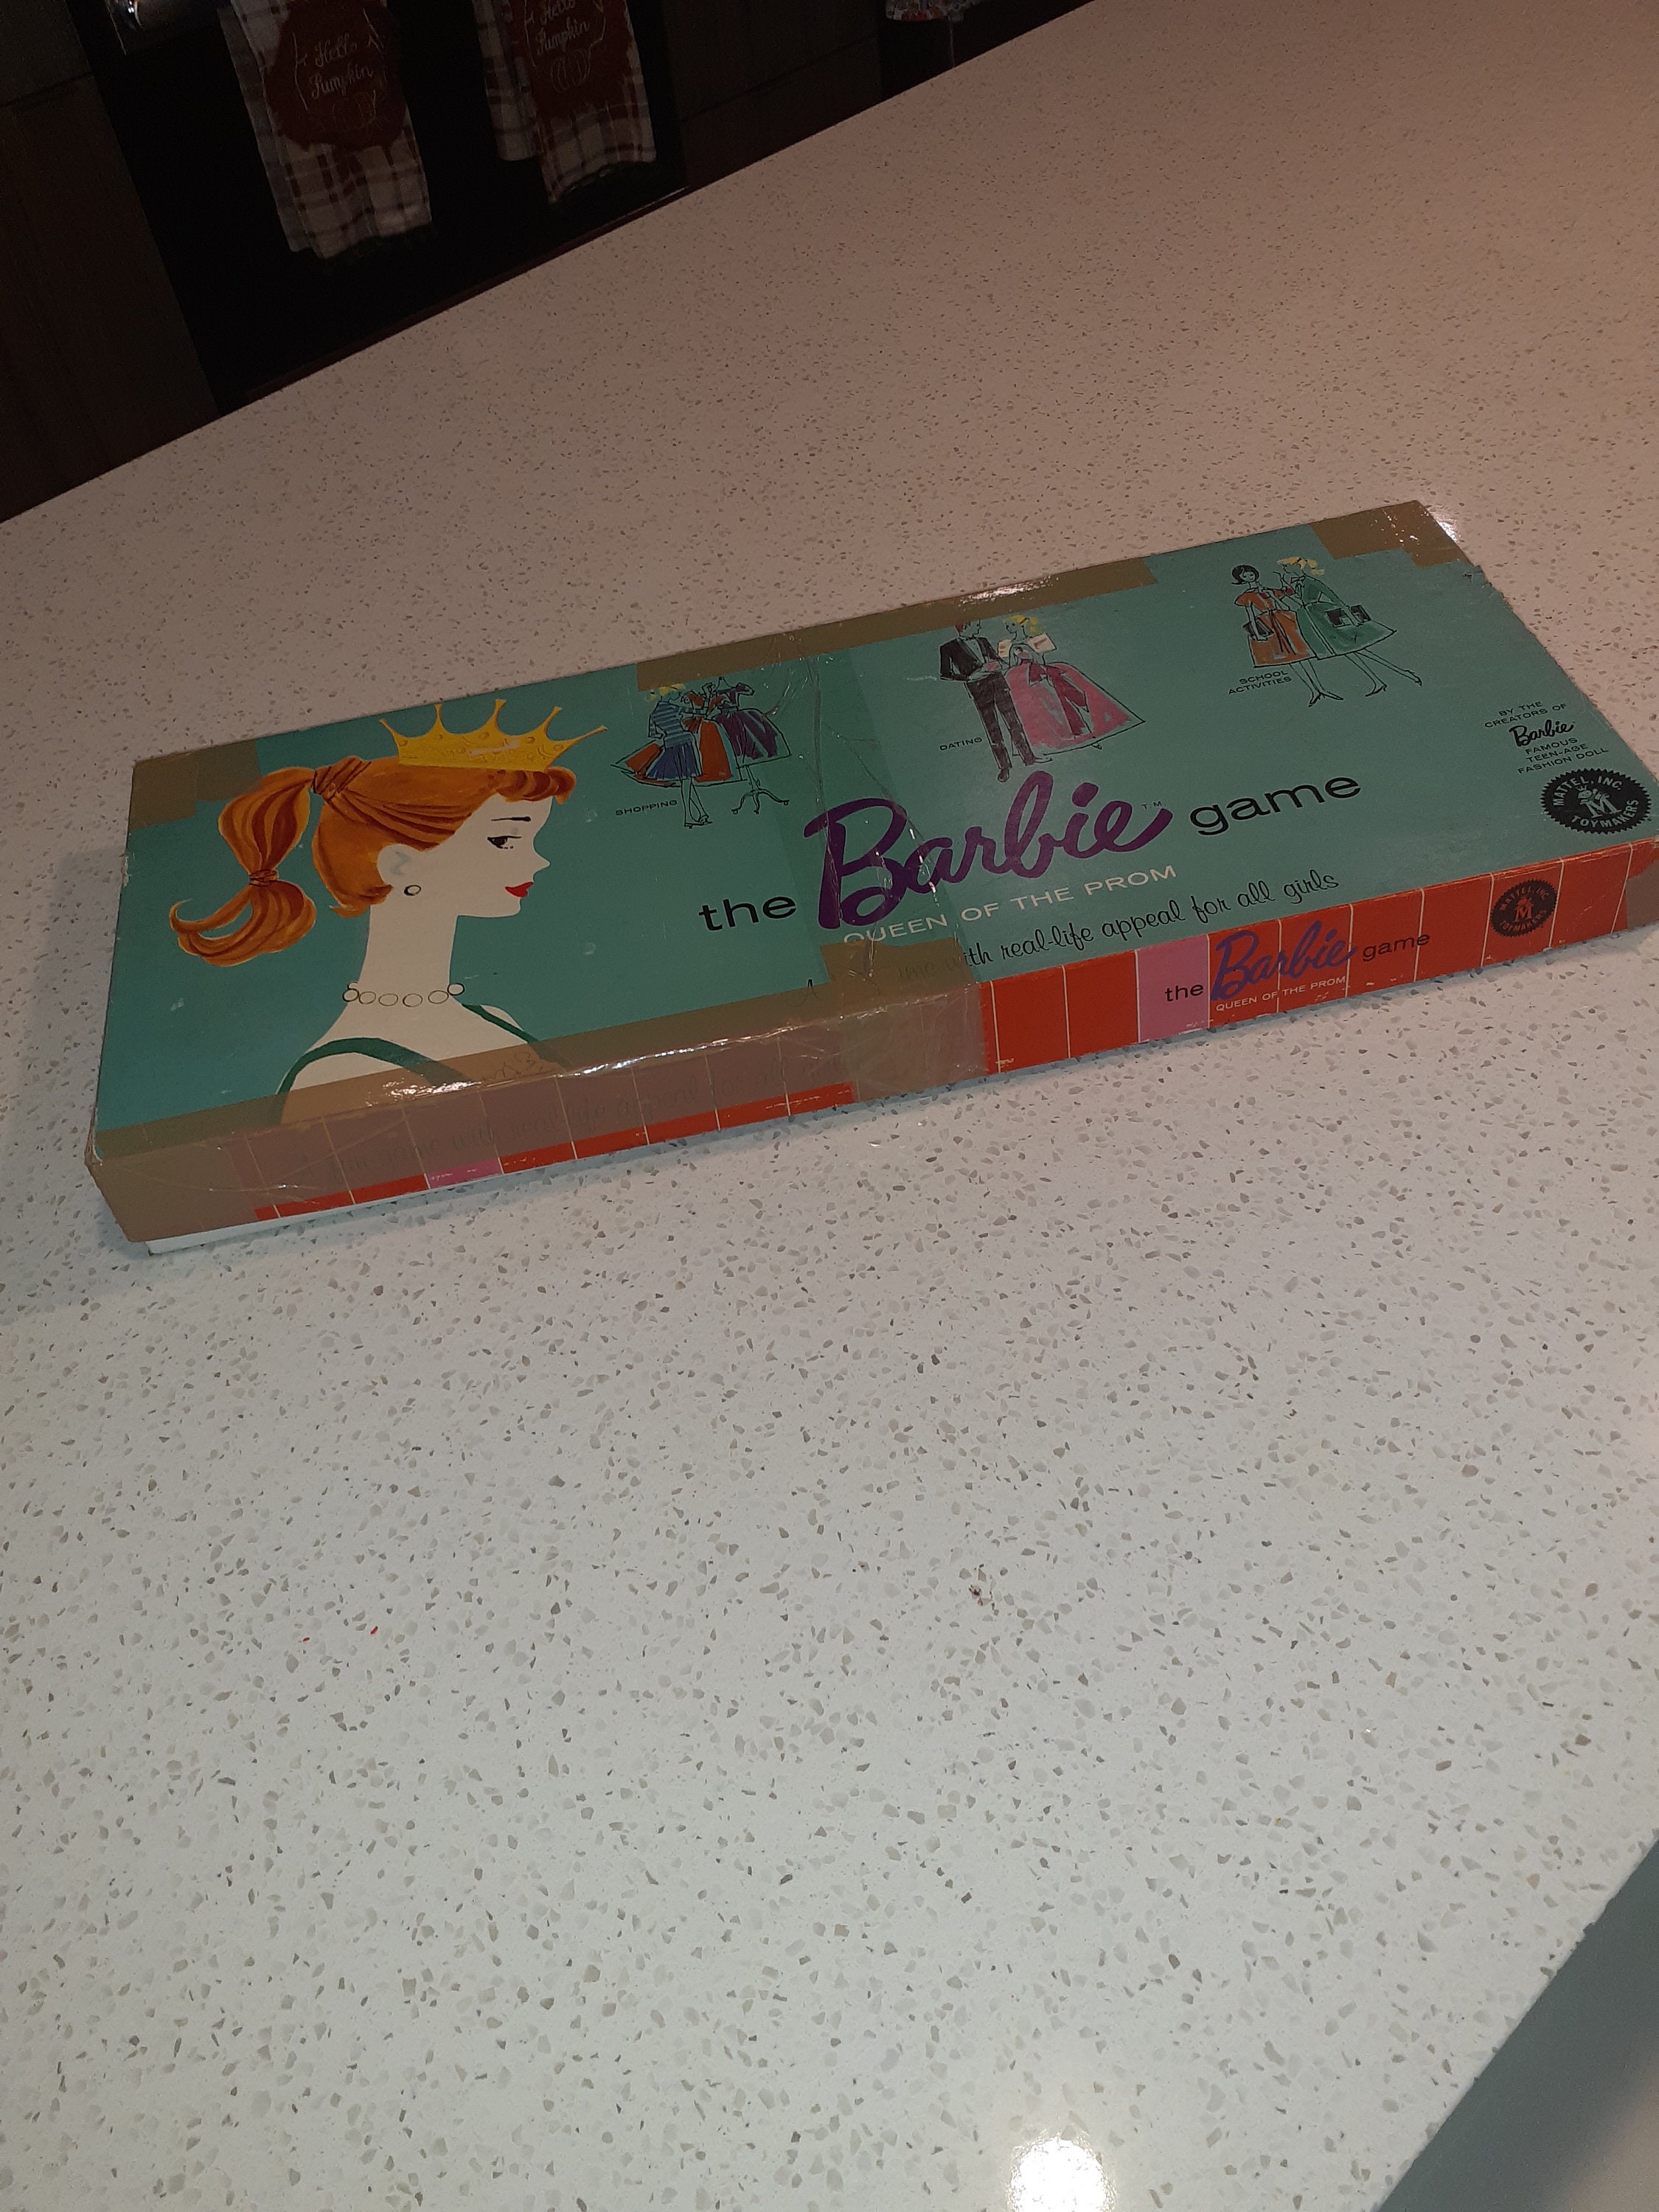 Board Game Replacement Pieces: The Barbie Game Queen of the Prom